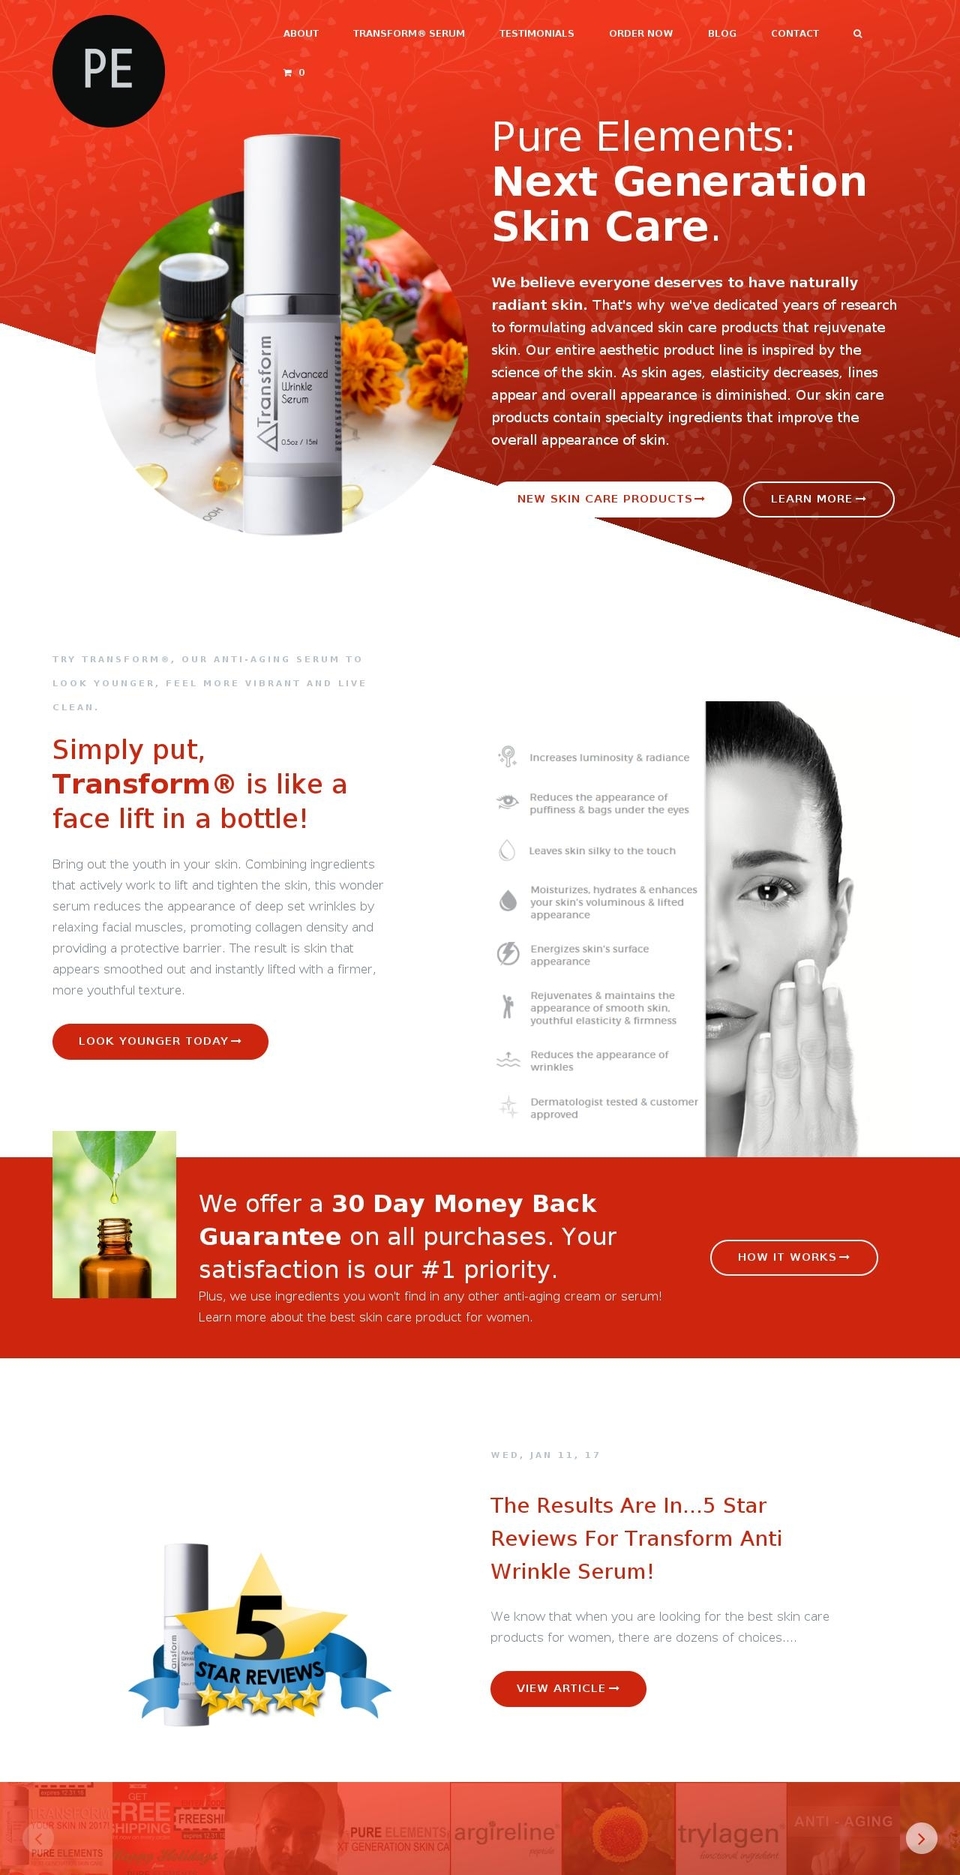 moist Shopify theme site example purelements.info